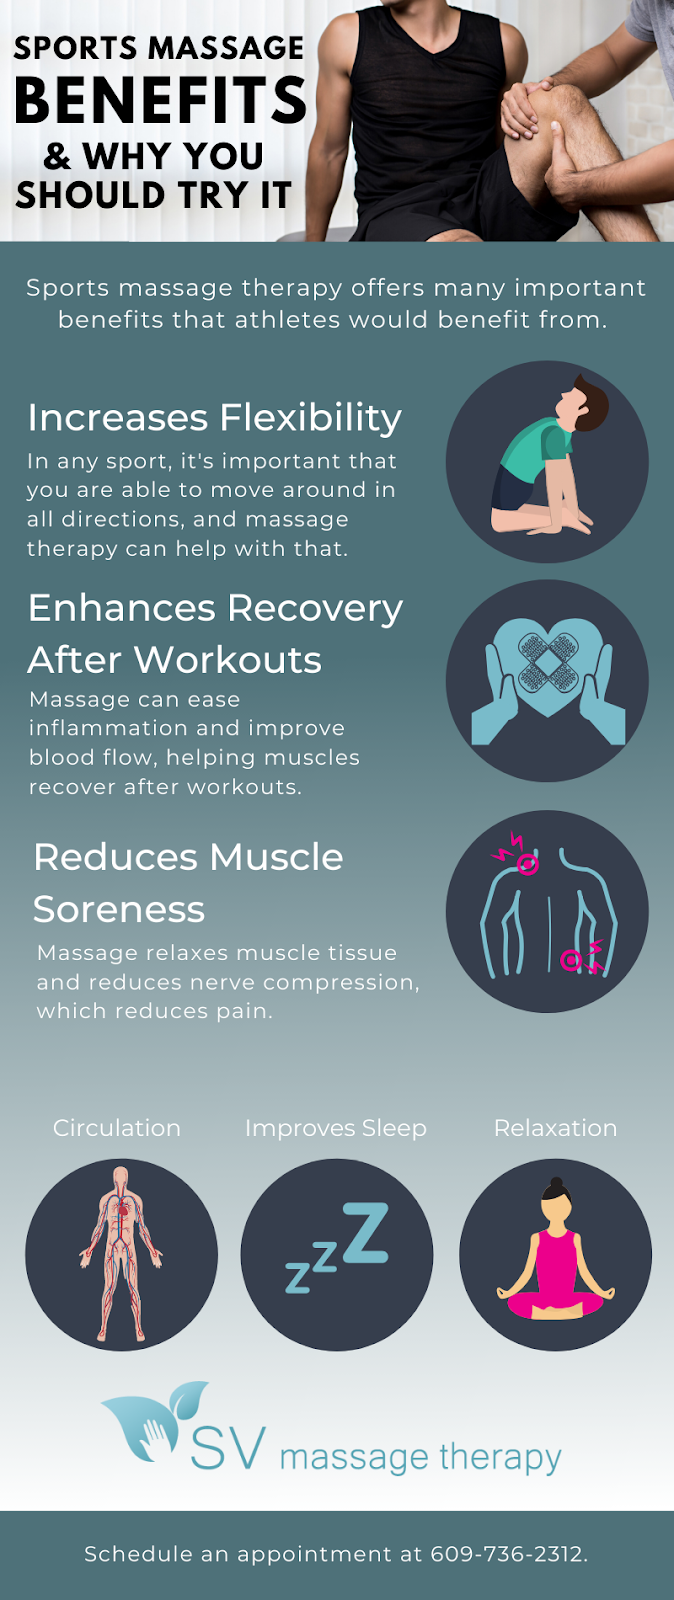 An infographic depicting various sports massage benefits and why you should try it.